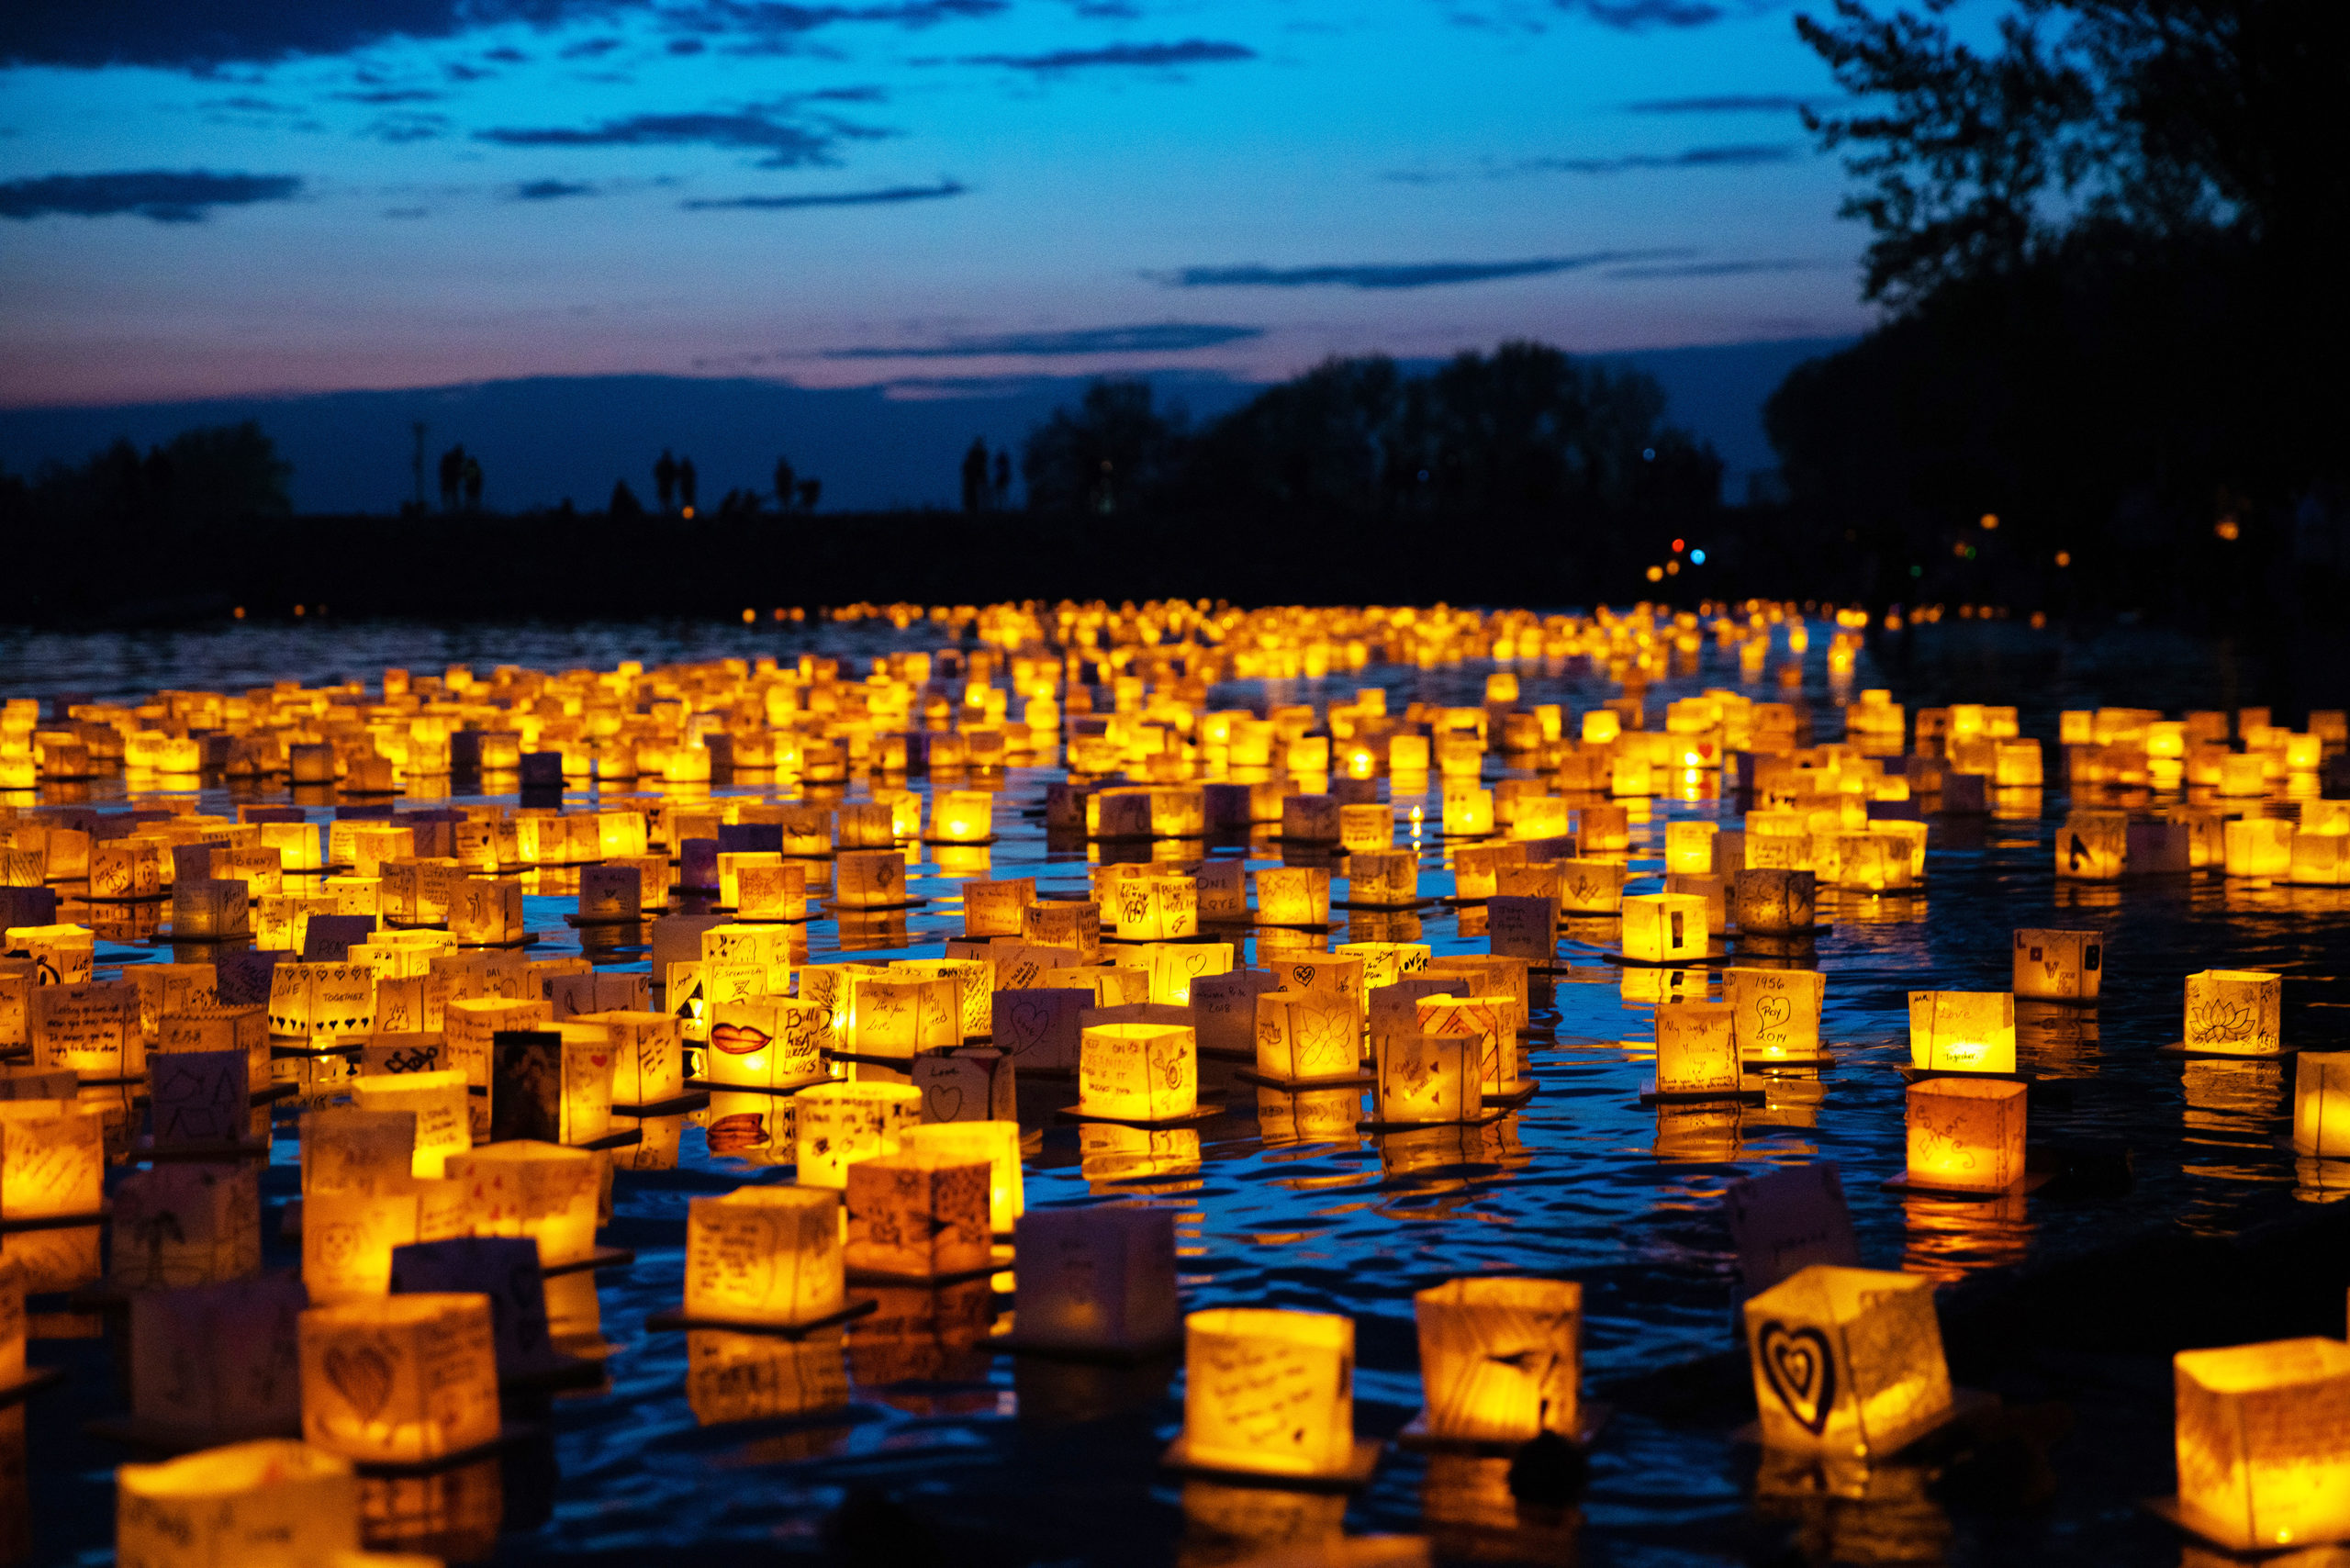 Water Lantern Festival comes to Fresno on Saturday, August 26